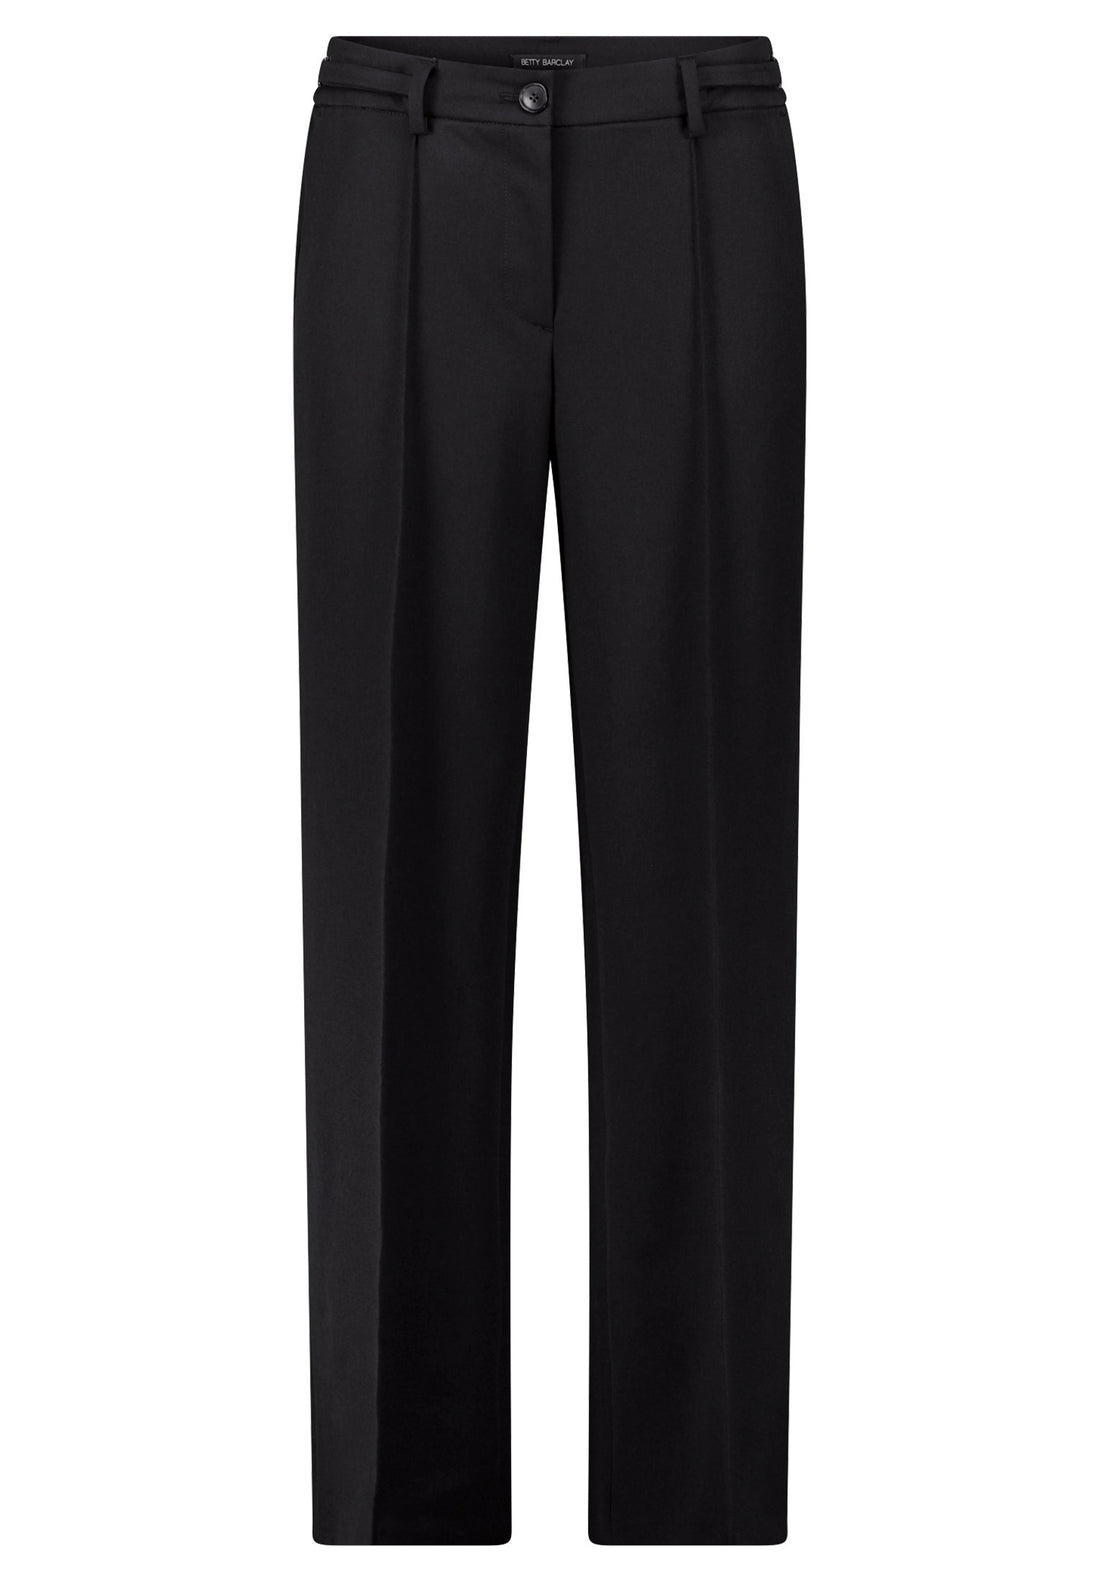 Black Dress Trousers With Center Pleat_6831-1055_9045_01